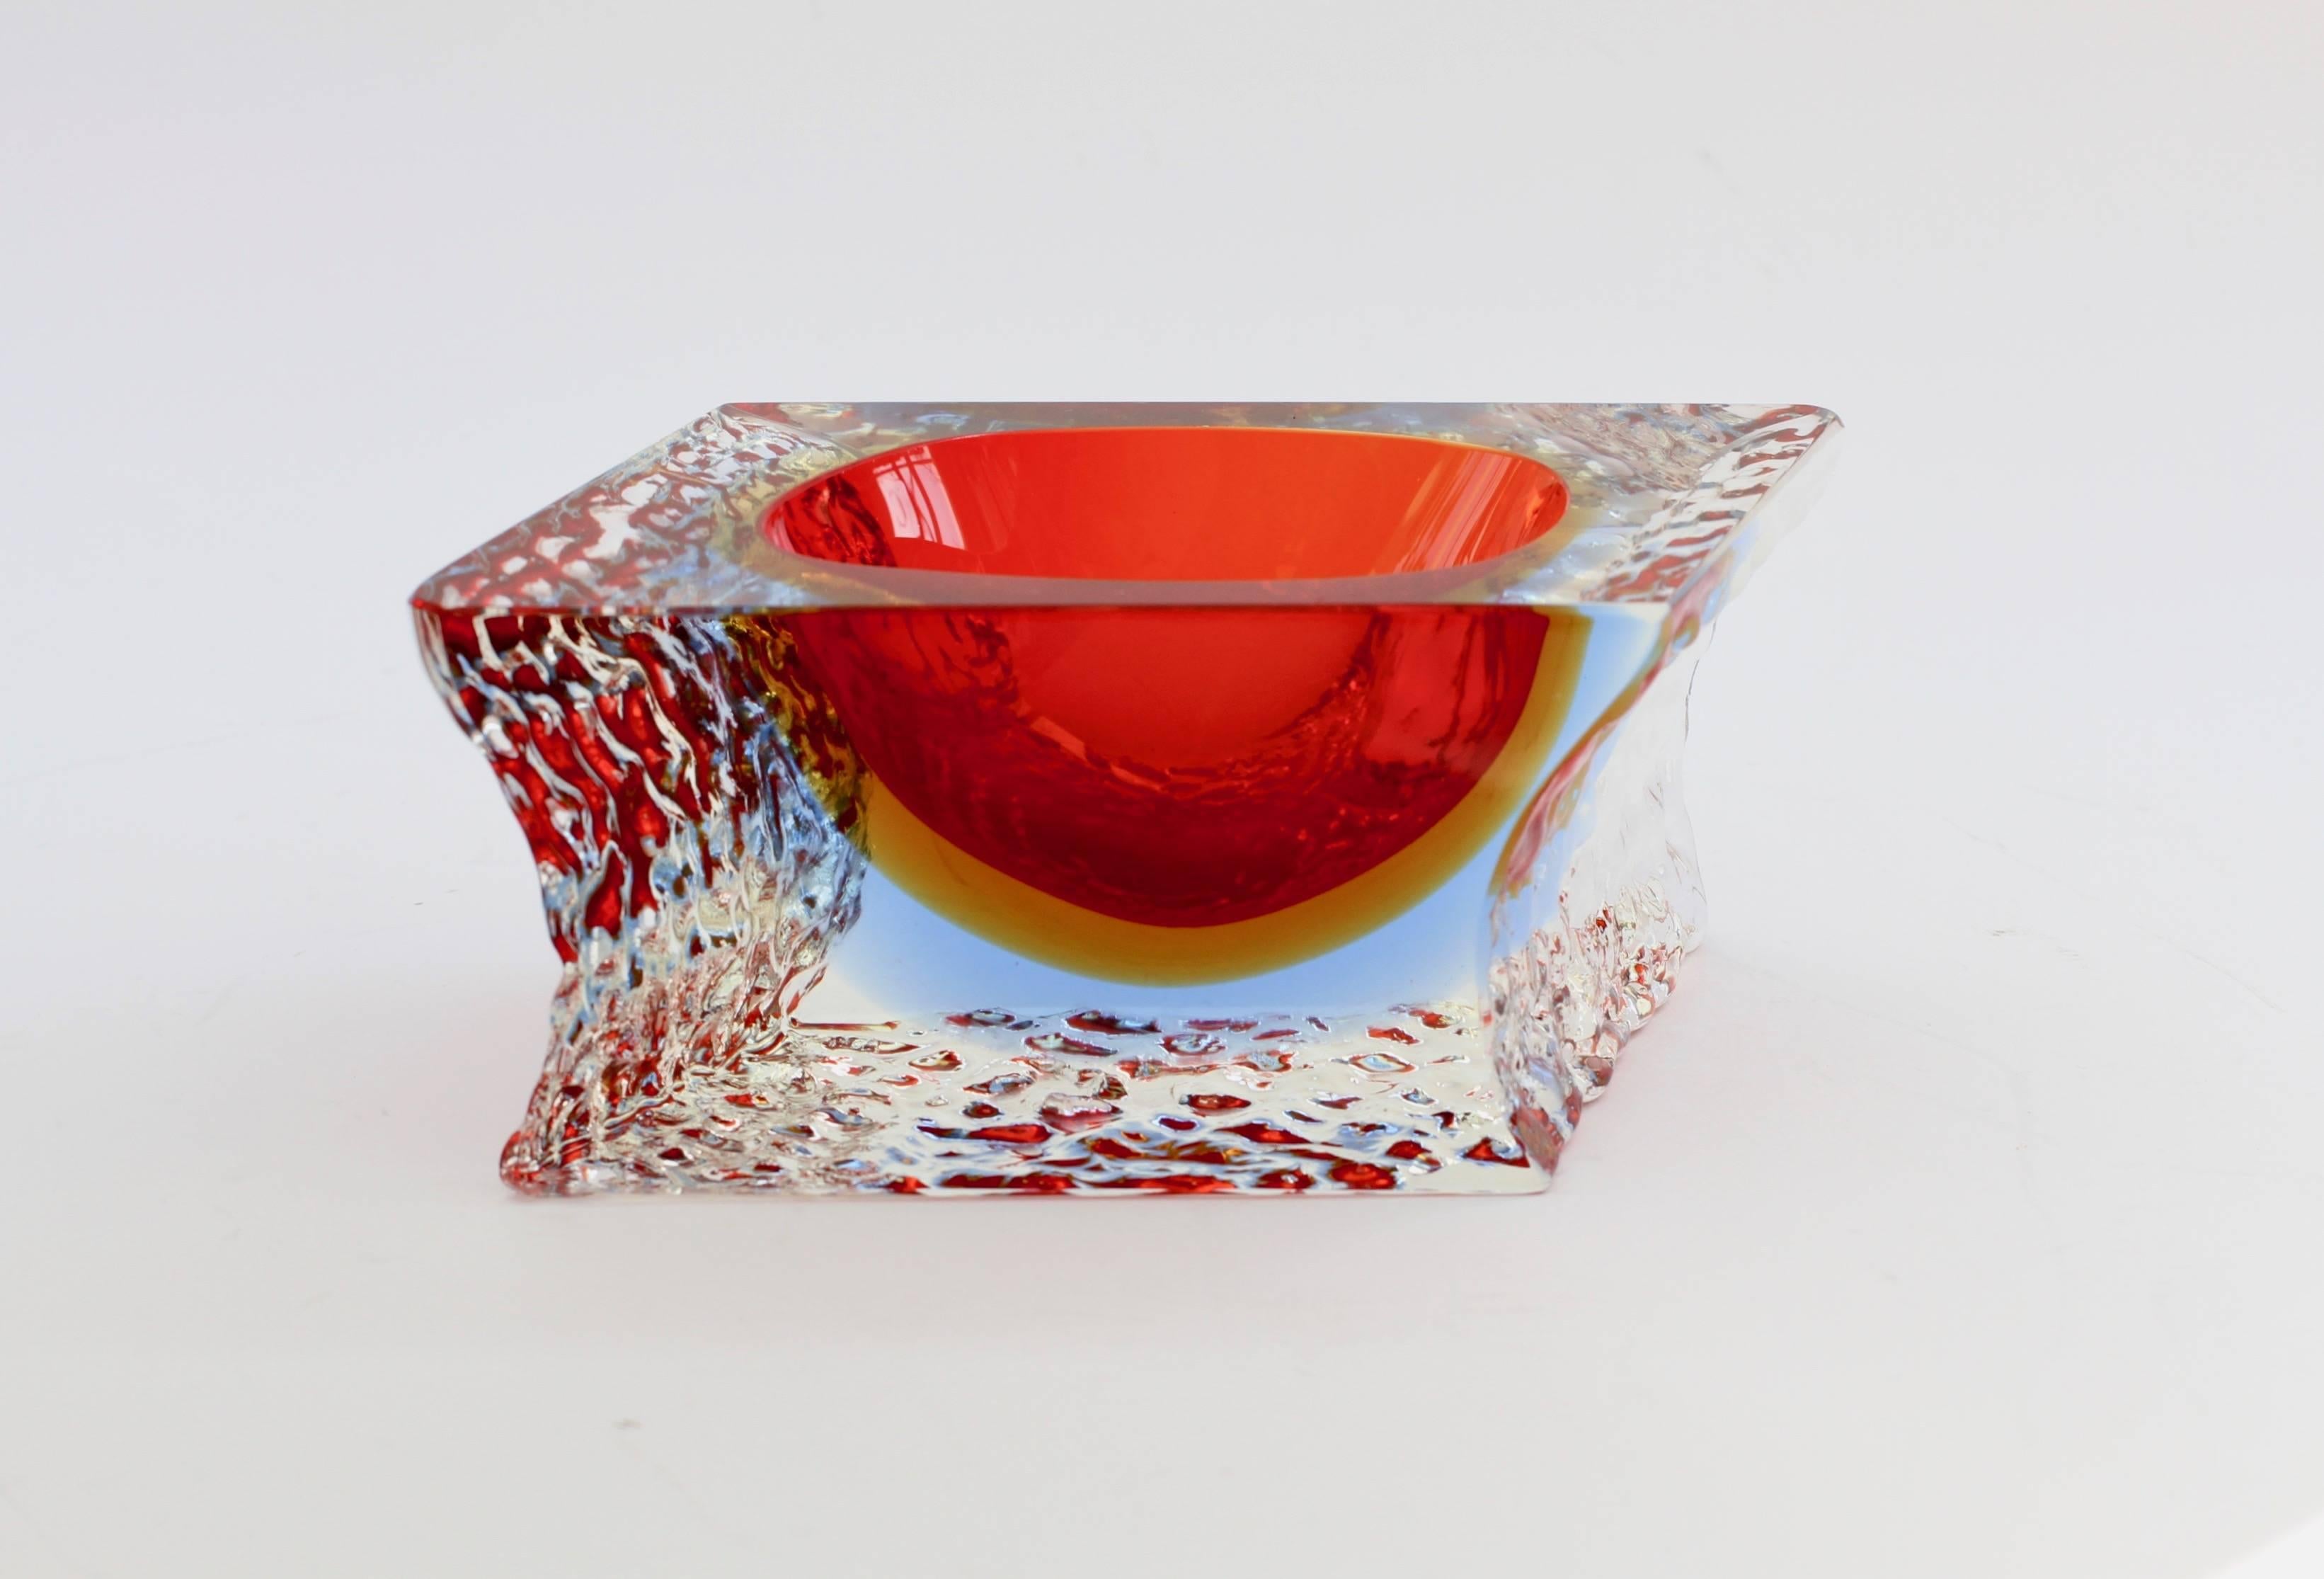 Beautiful vintage Mid-Century Italian Murano art glass bowl, dish or ashtray attributed to Mandruzzato, circa 1980s. The combination of ruby red over ochre yellow over sky blue with the textured clear 'Sommerso' ice glass looks simply stunning.